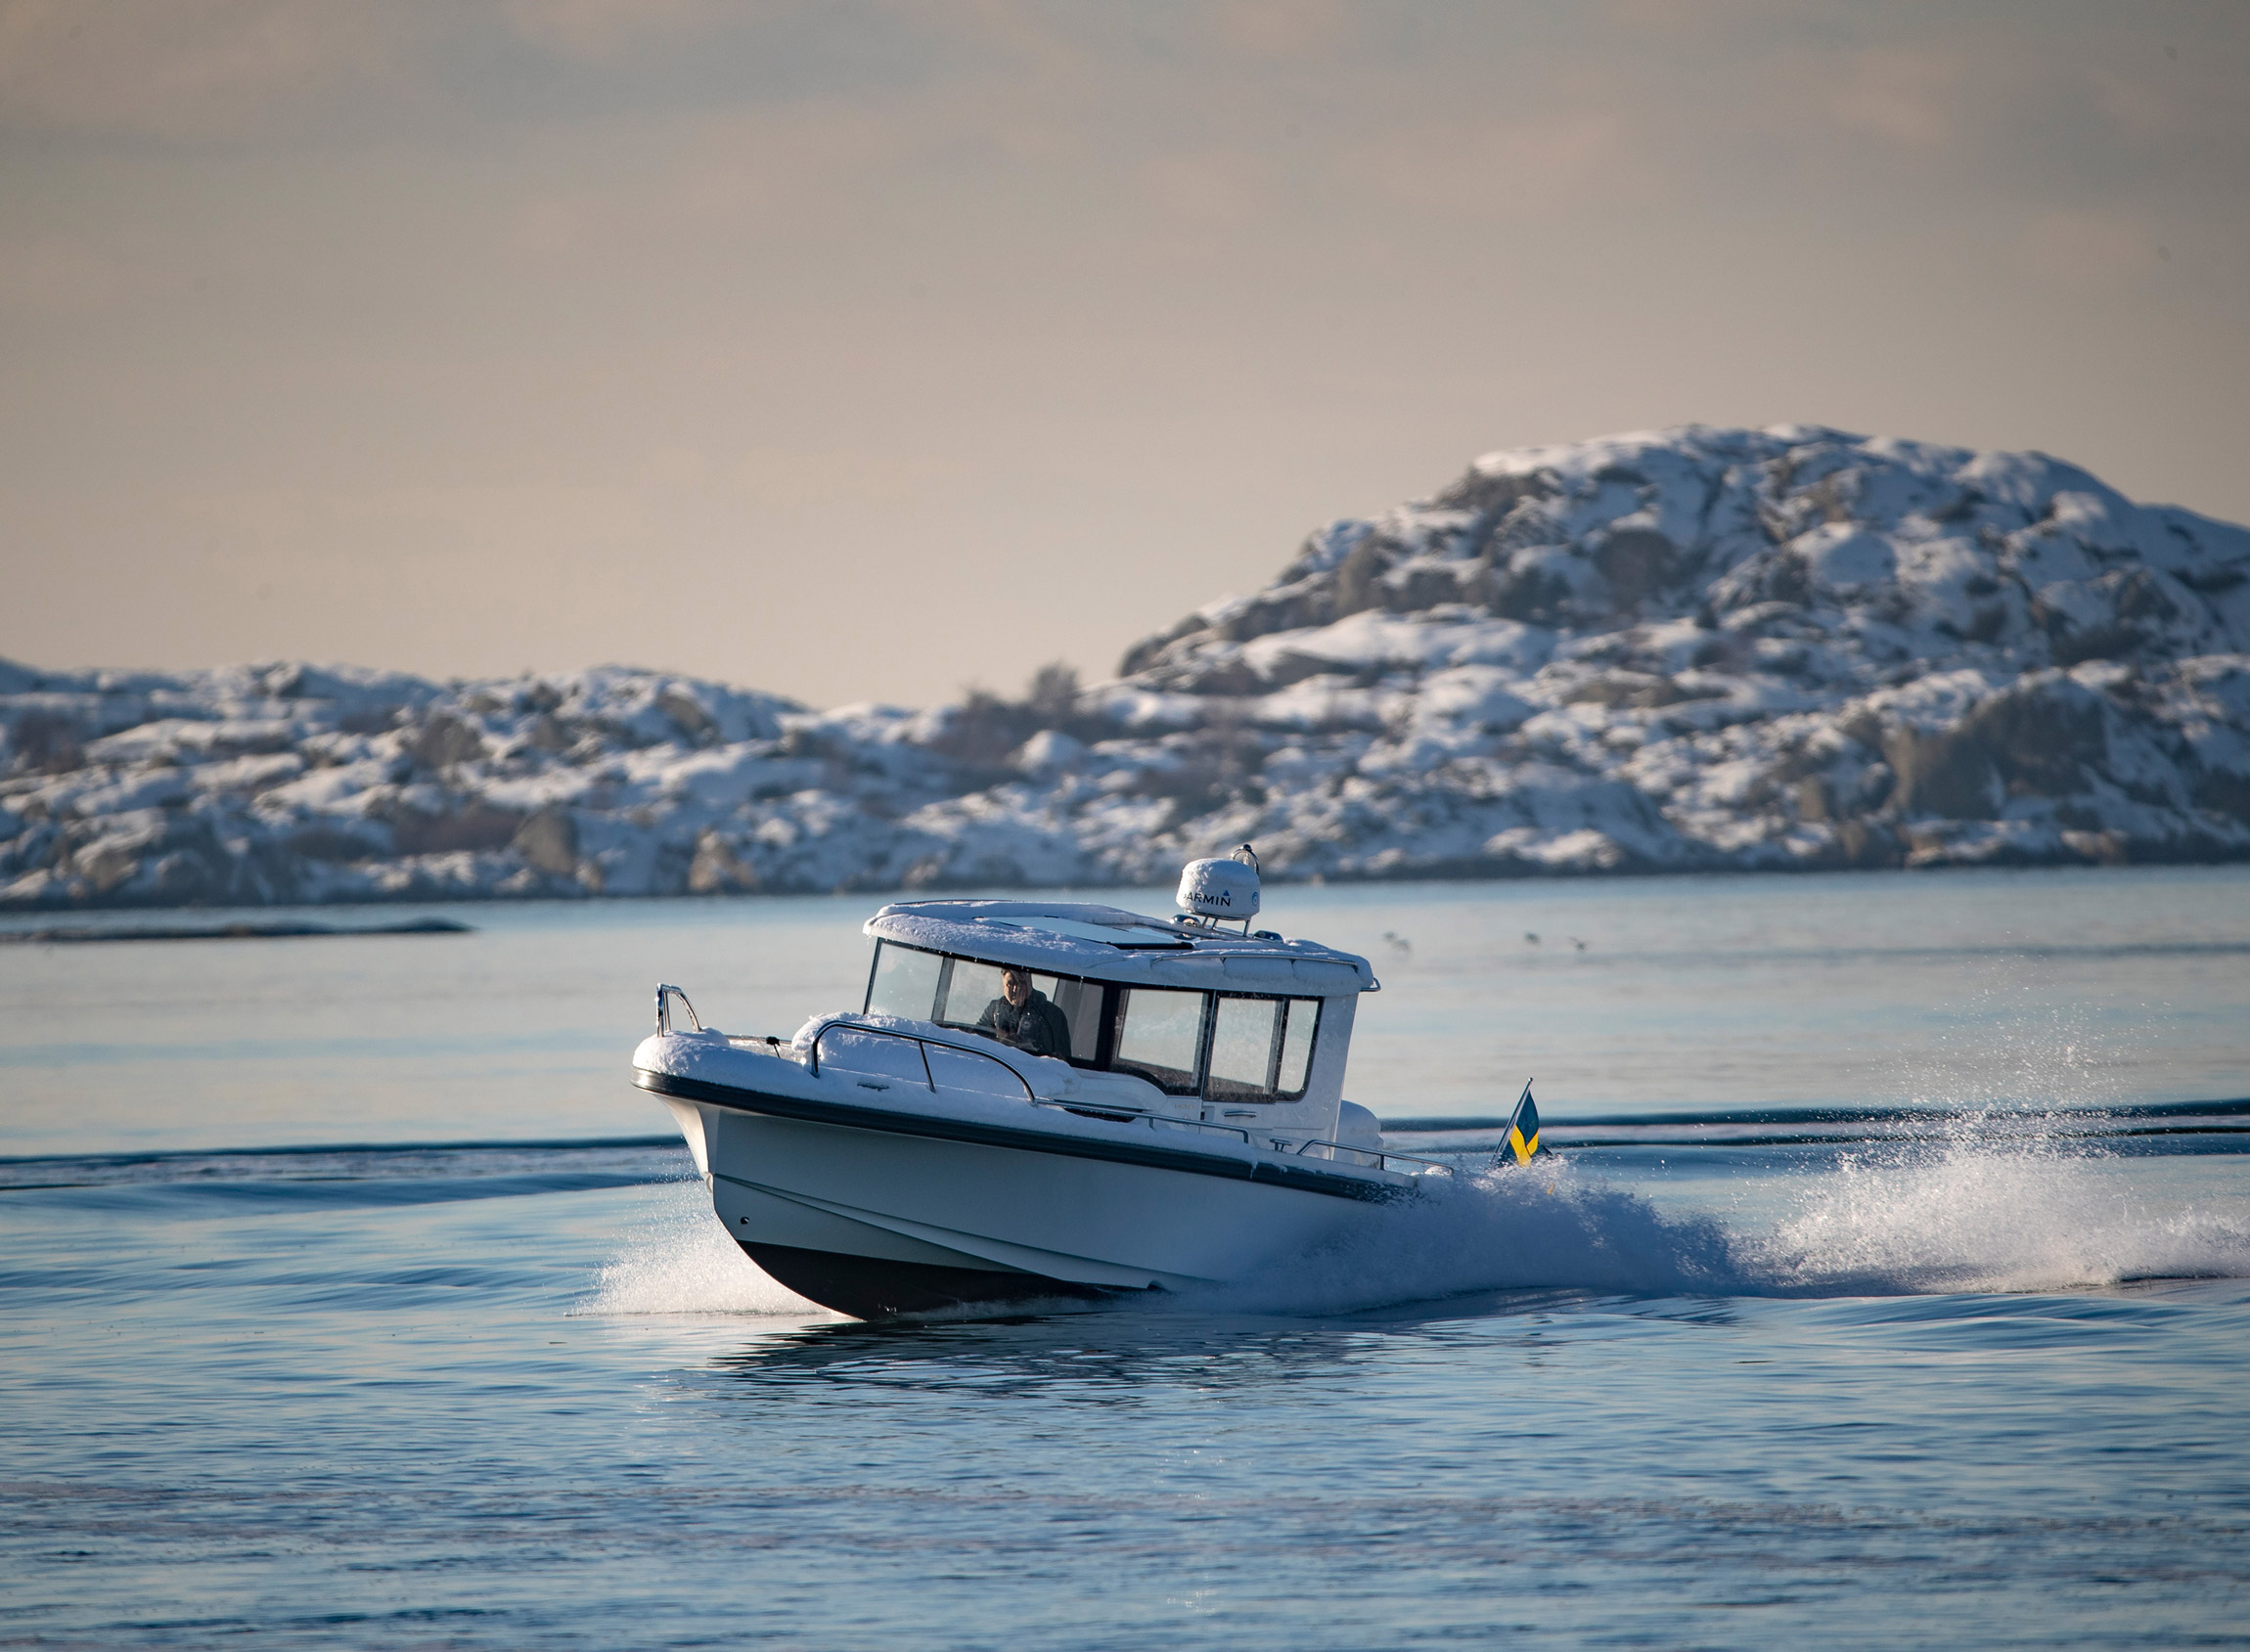 Nimbus C9 boat driving in the ocean on a snowy day